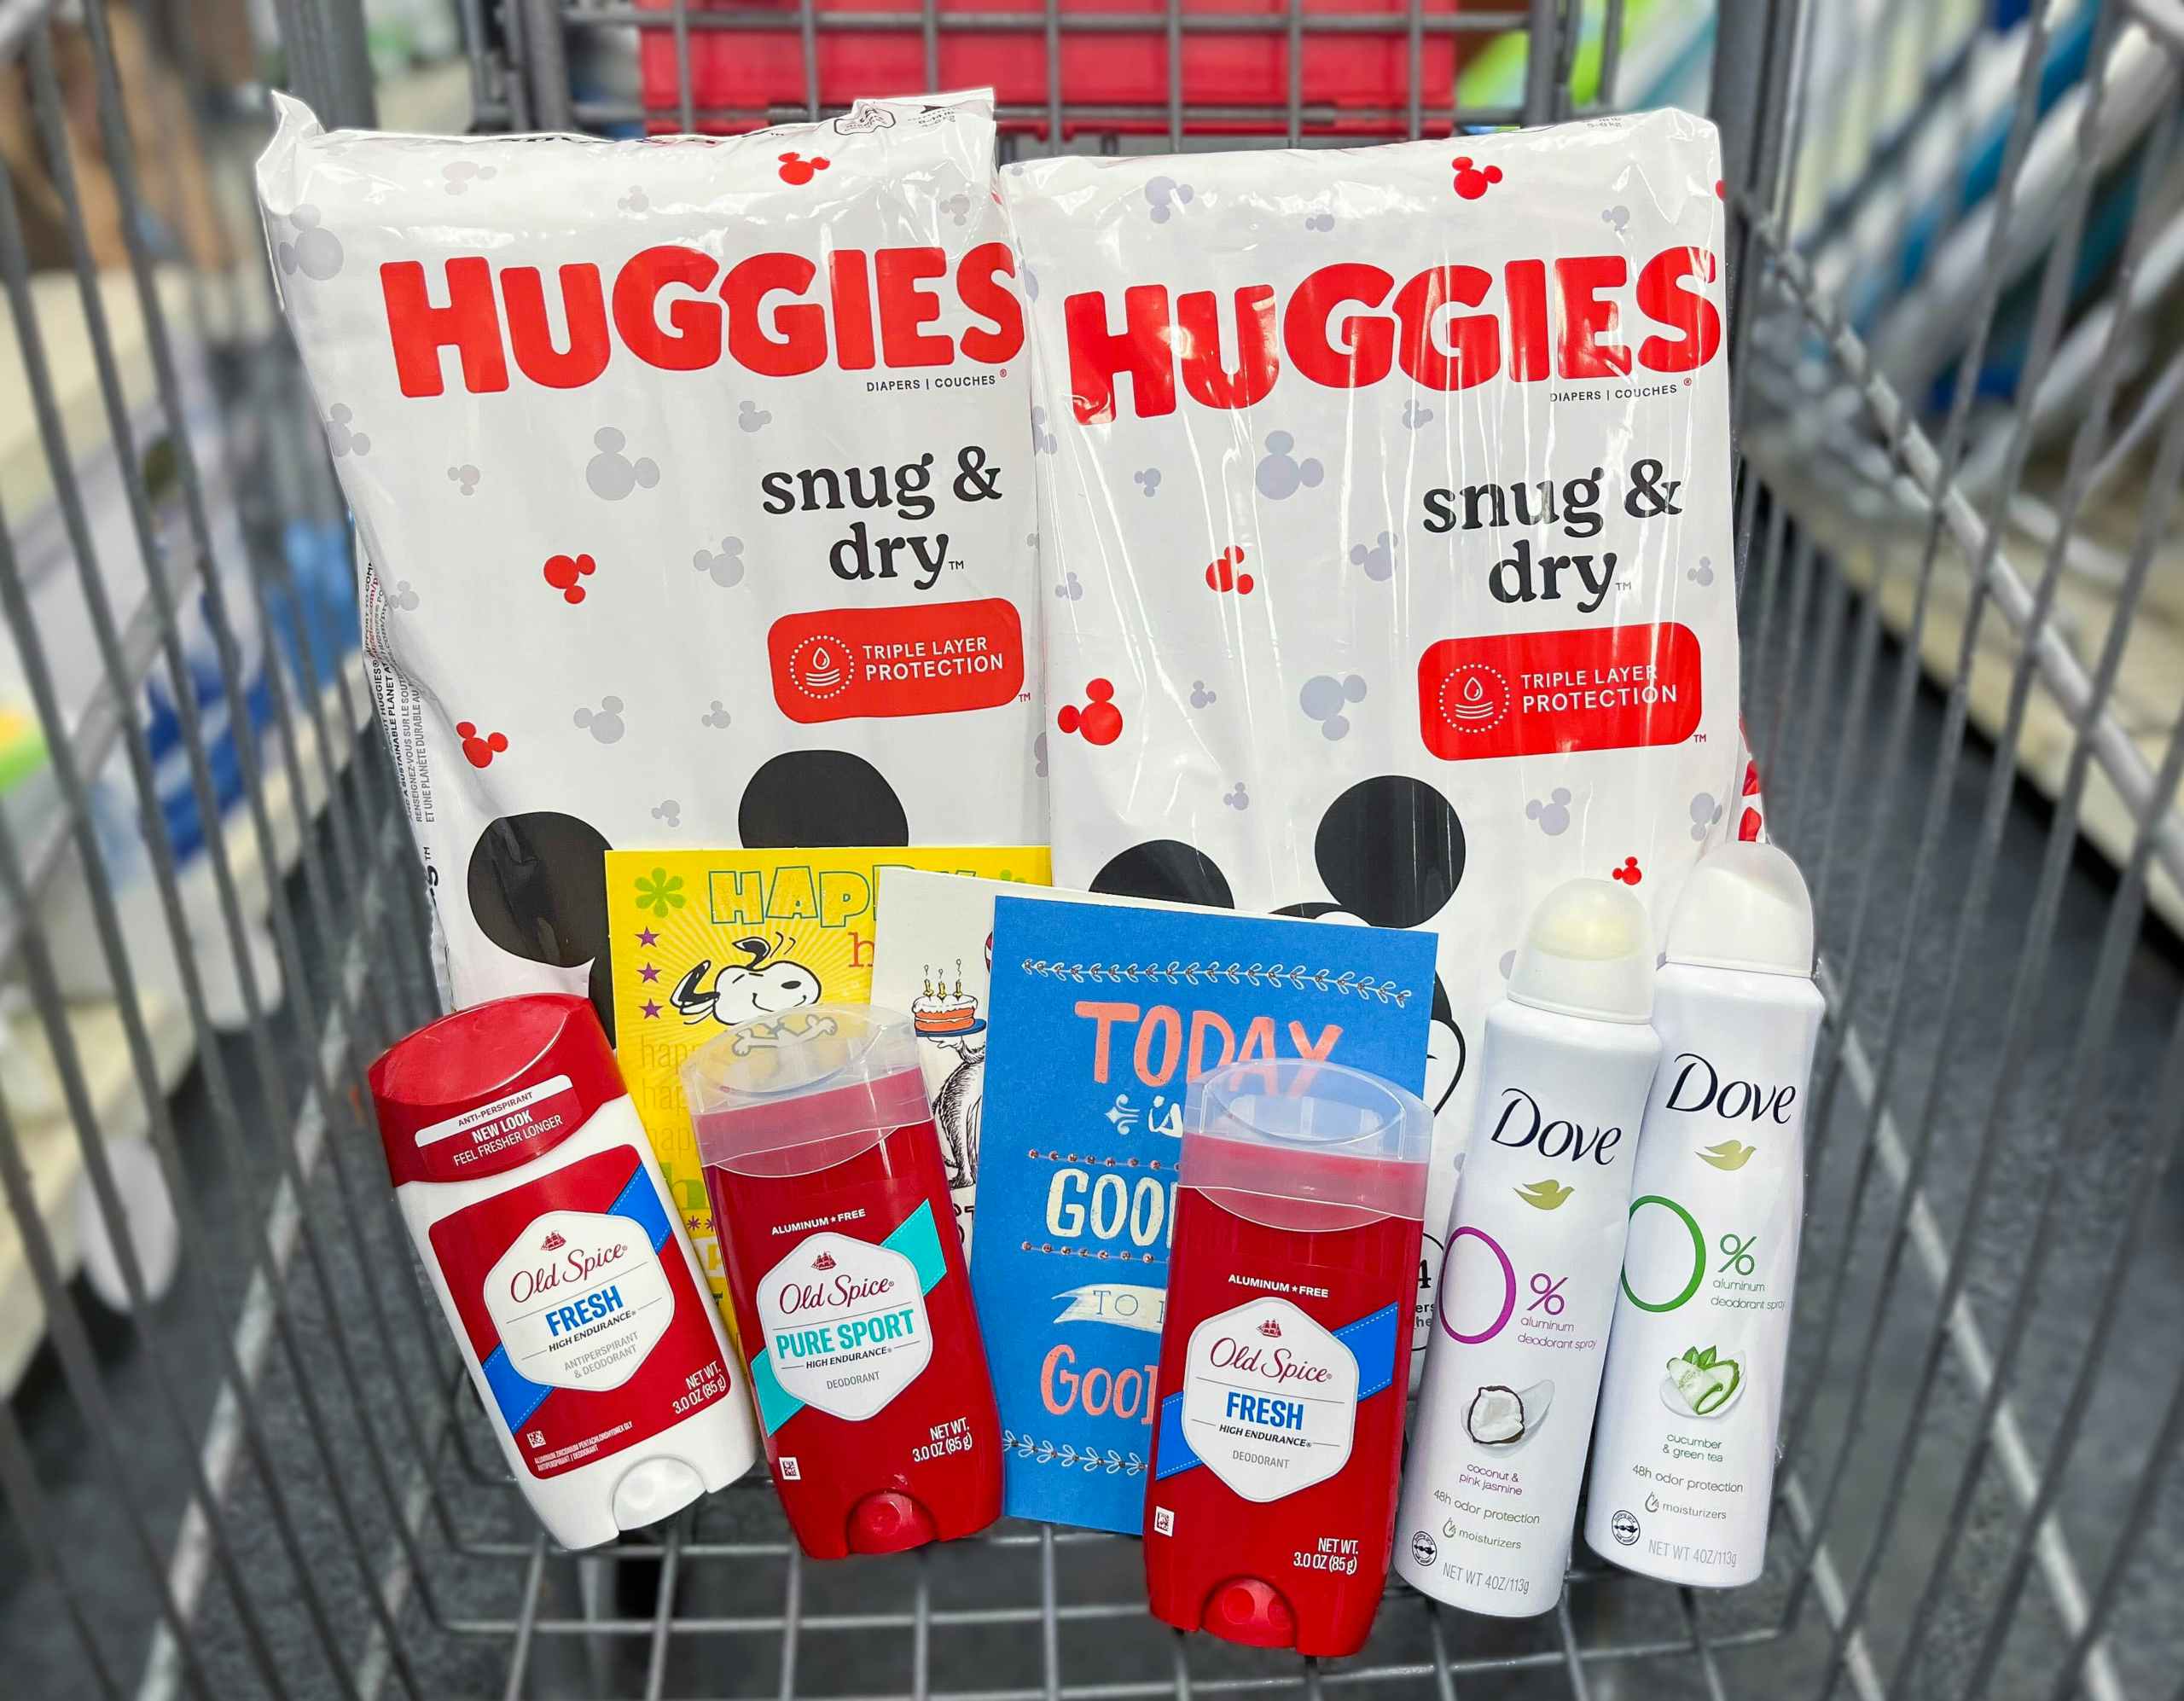 two packs of Huggies snug and dry diapers, three Old Spice deodorants, two Dove dry sprays, and three Hallmark cards inside shopping cart